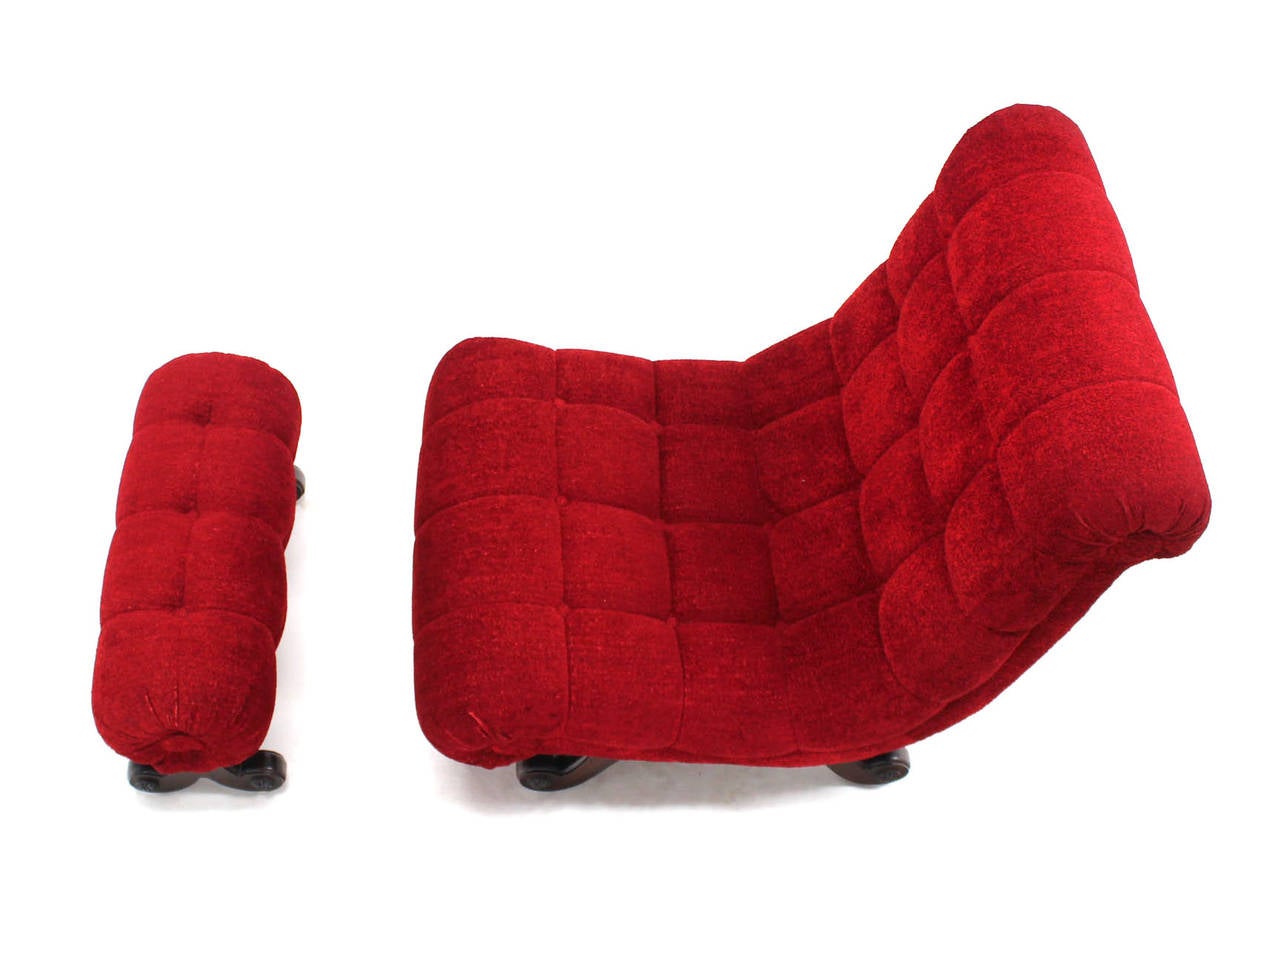 Mid-Century Modern Hollywood Regency Scoop Shape Lounge Chair Foot Stool Red Upholstery HOT